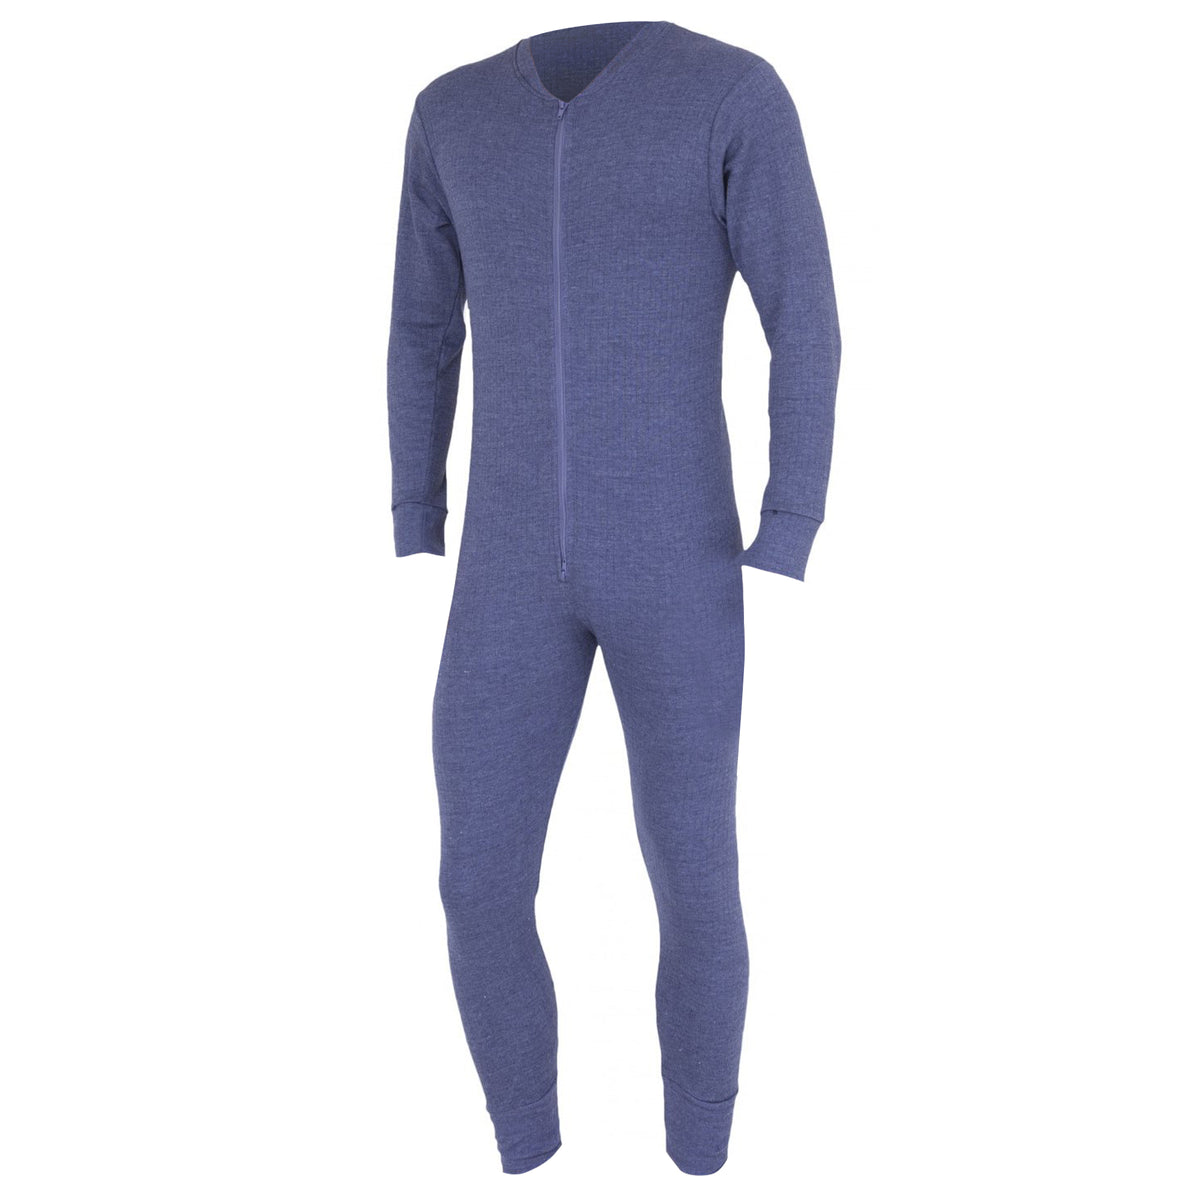 FLOSO Mens Thermal Underwear All In One Union Suit – Floso